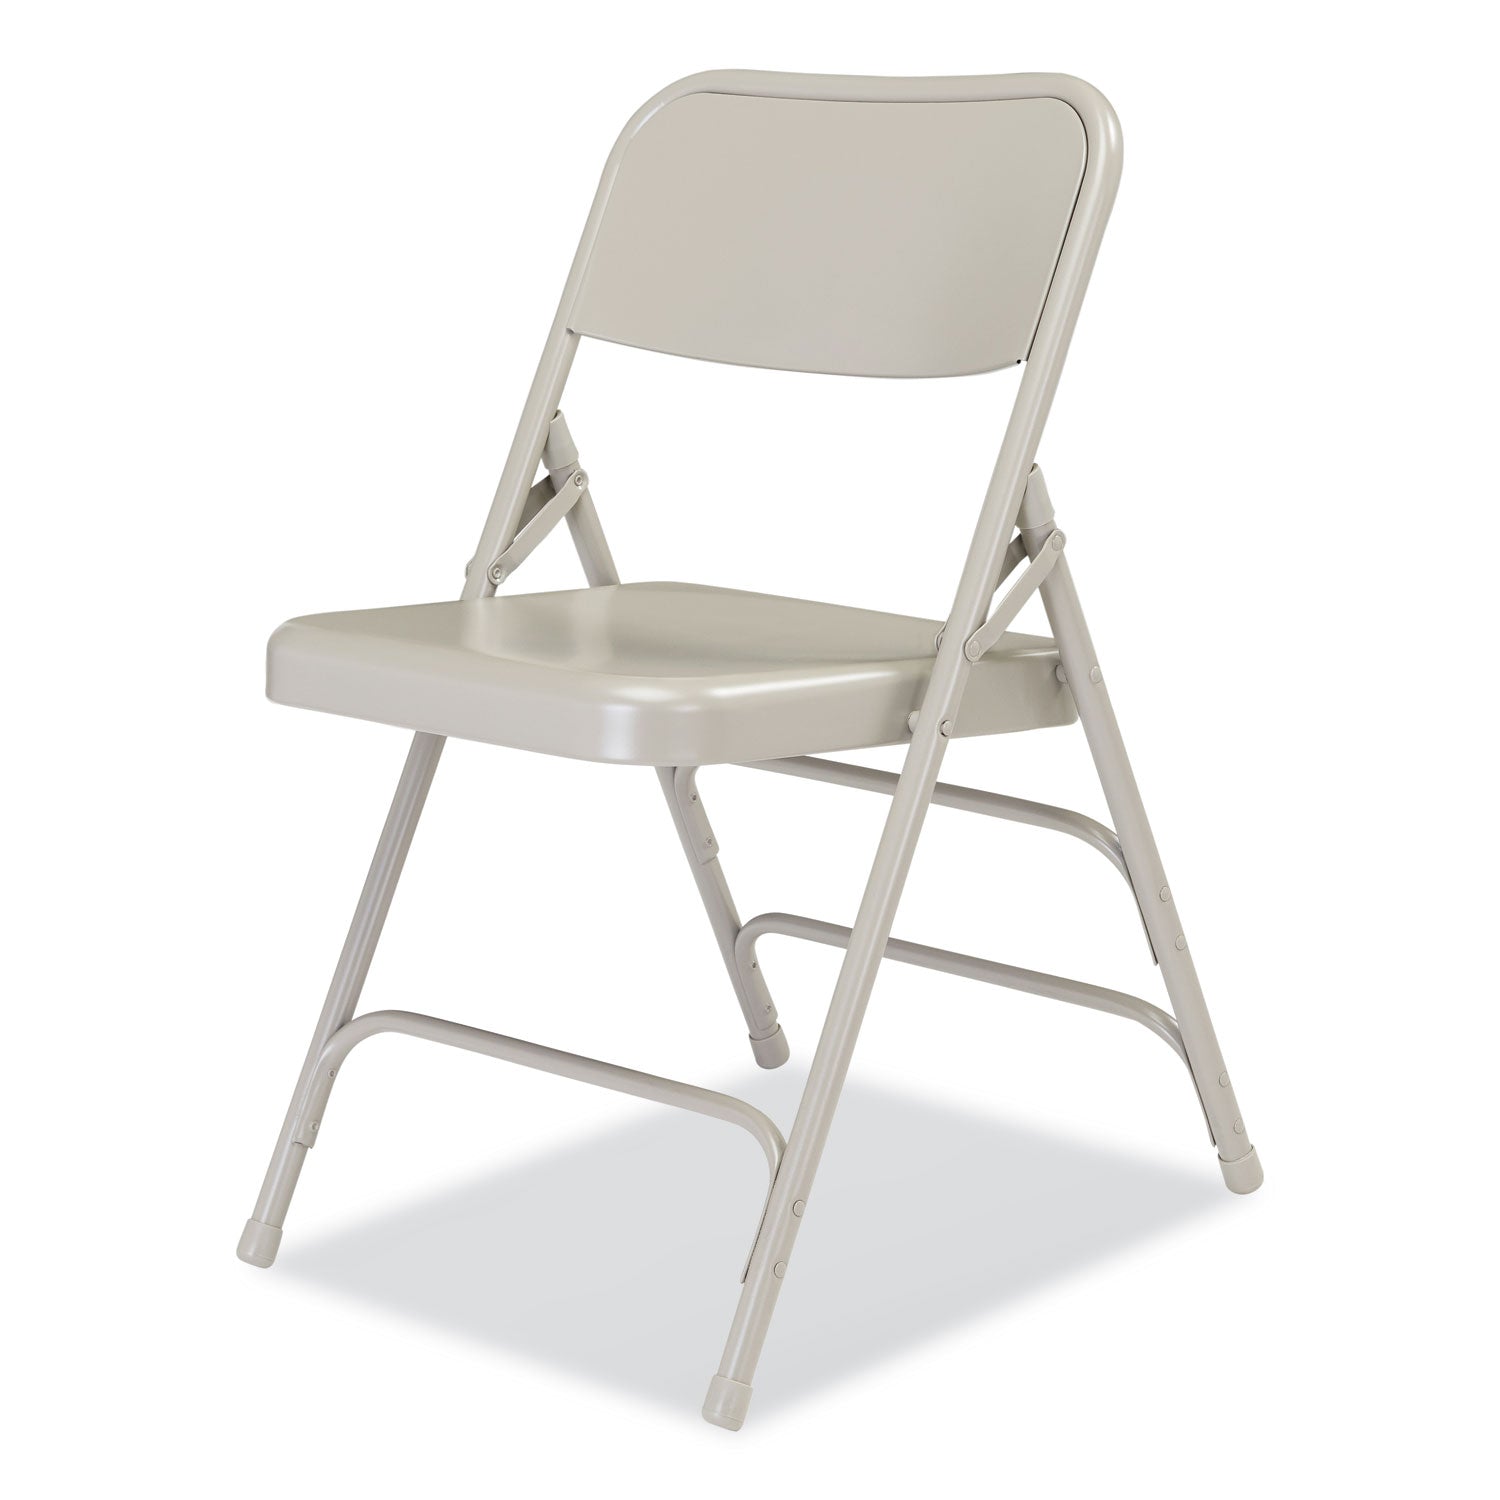 300-series-deluxe-all-steel-triple-brace-folding-chair-supports-480-lb-1725-seat-height-gray-4-ctships-in-1-3-bus-days_nps302 - 3